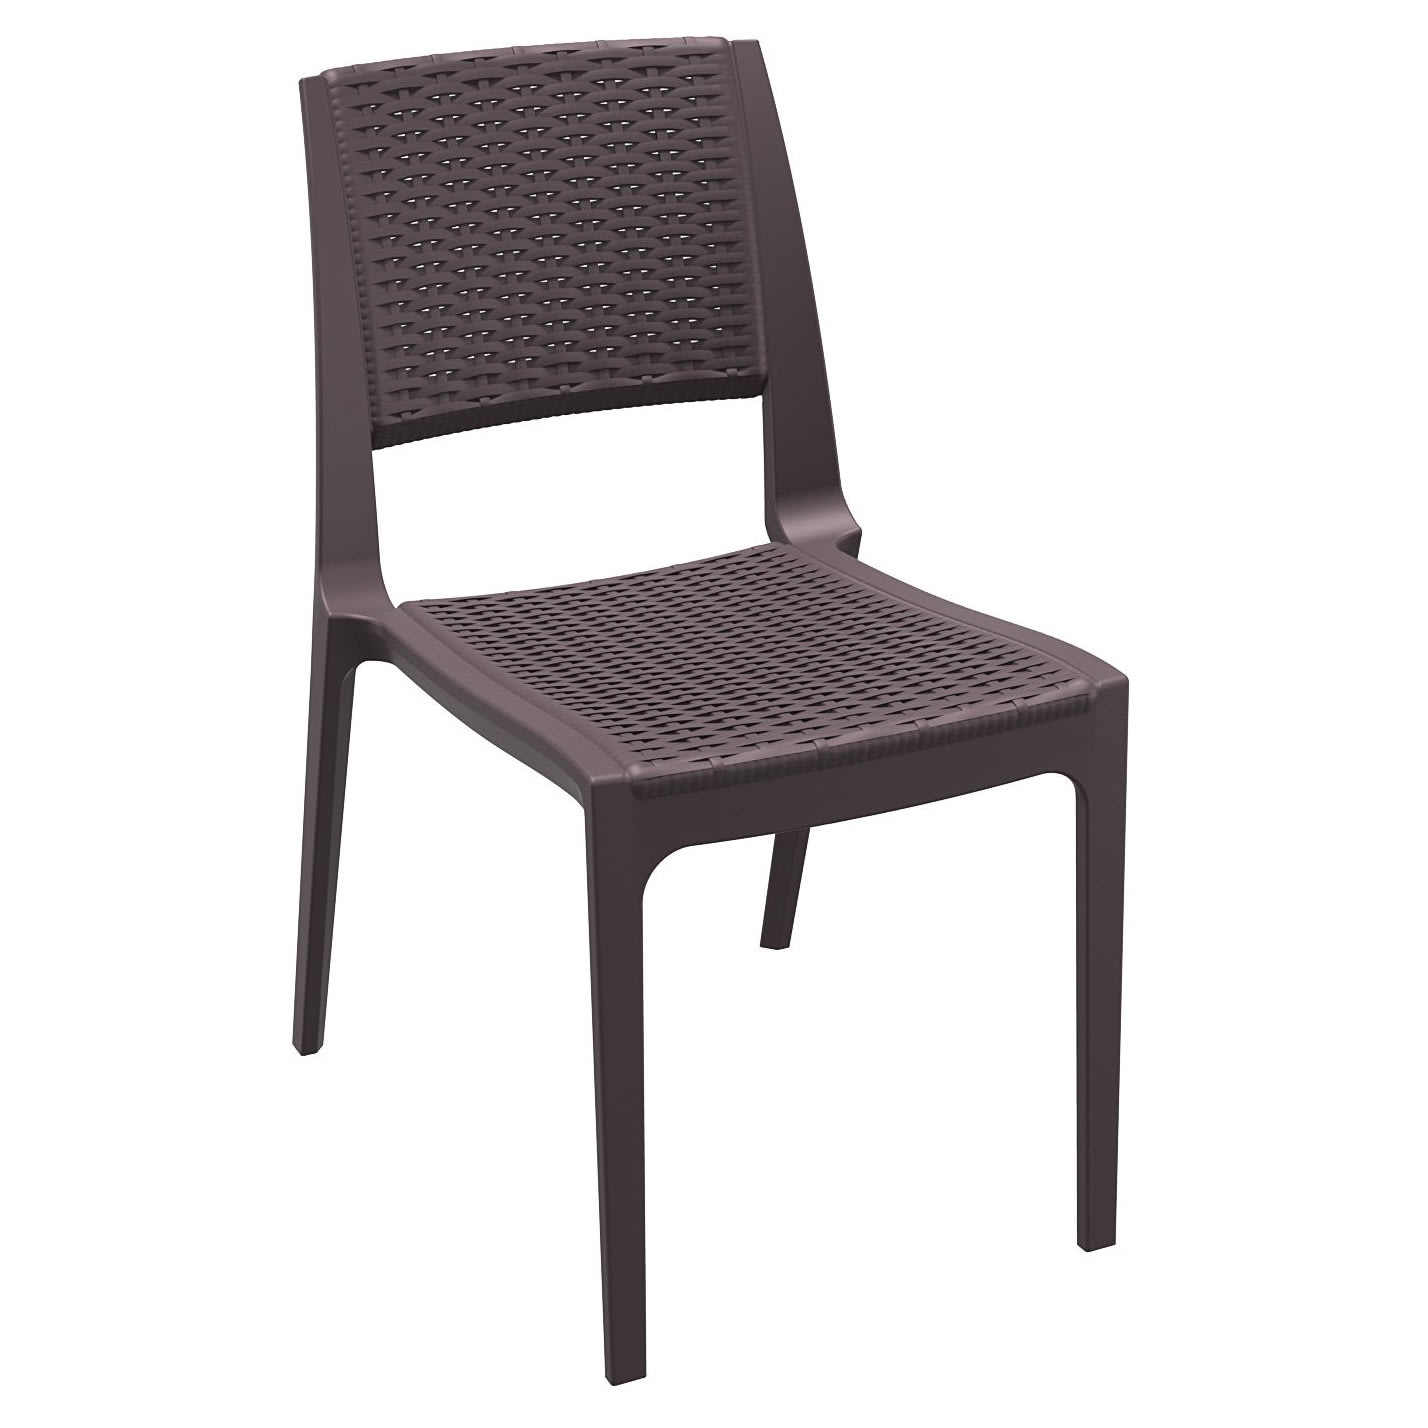 Selina Wicker Look Resin Patio Chair with Selina Wicker Look Resin Patio Chair